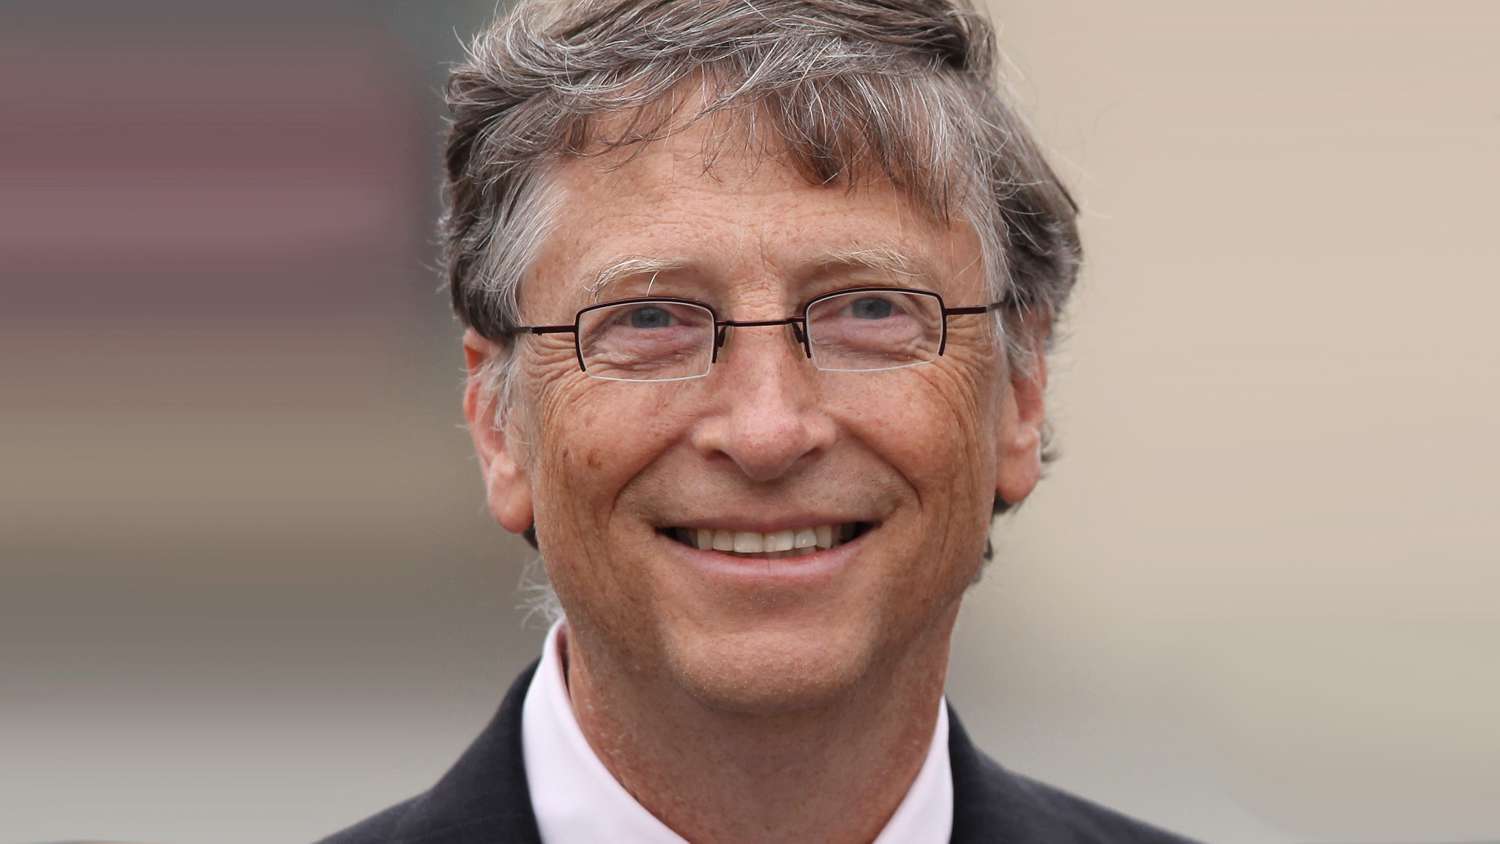 Happy 63rd Birthday Bill Gates – Thanks for Making the World a Better Place